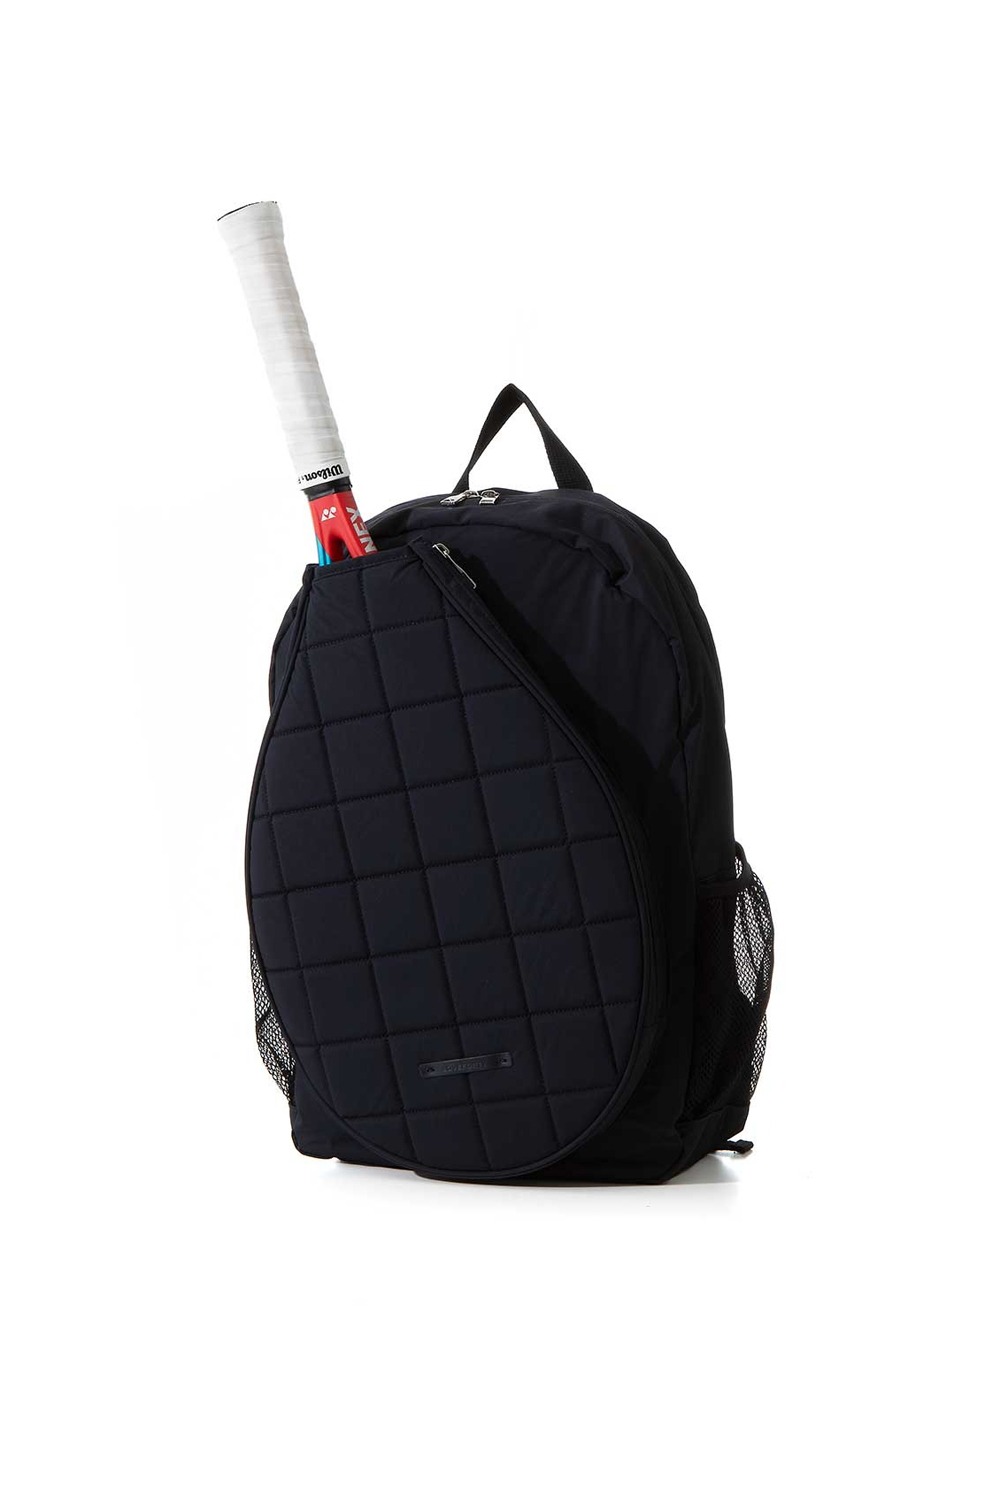 LOVEFORTY QUILTING RACKET BACKPACK (NAVY) RICHEZ